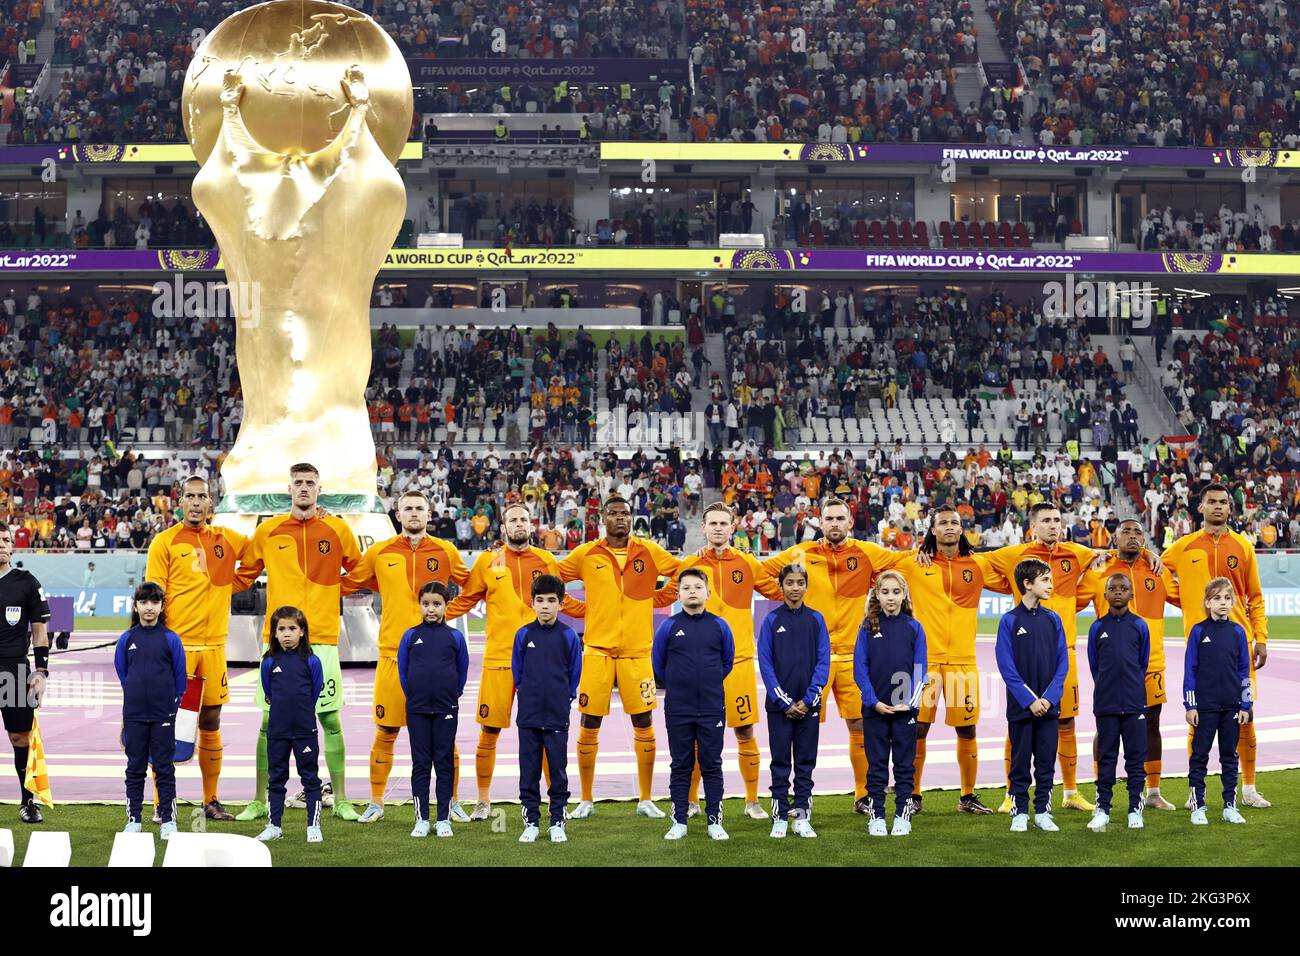 Doha, Qatar. 21st Nov, 2022. DOHA - (lr) Virgil van Dijk of Holland, Holland goalkeeper Andries Noppert, Matthijs de Ligt of Holland, Daley Blind of Holland, Denzel Dumfries of Holland, Frenkie de Jong of Holland, Vincent Janssen of Holland, Nathan Ake of Holland, Steven Berghuis of Holland, Steven Bergwijn of Holland, Cody Gakpo of Holland during the FIFA World Cup Qatar 2022 group A match between Senegal and the Netherlands at Al Thumama Stadium on November 21, 2022 in Doha, Qatar. ANP MAURICE VAN STONE Credit: ANP/Alamy Live News Stock Photo